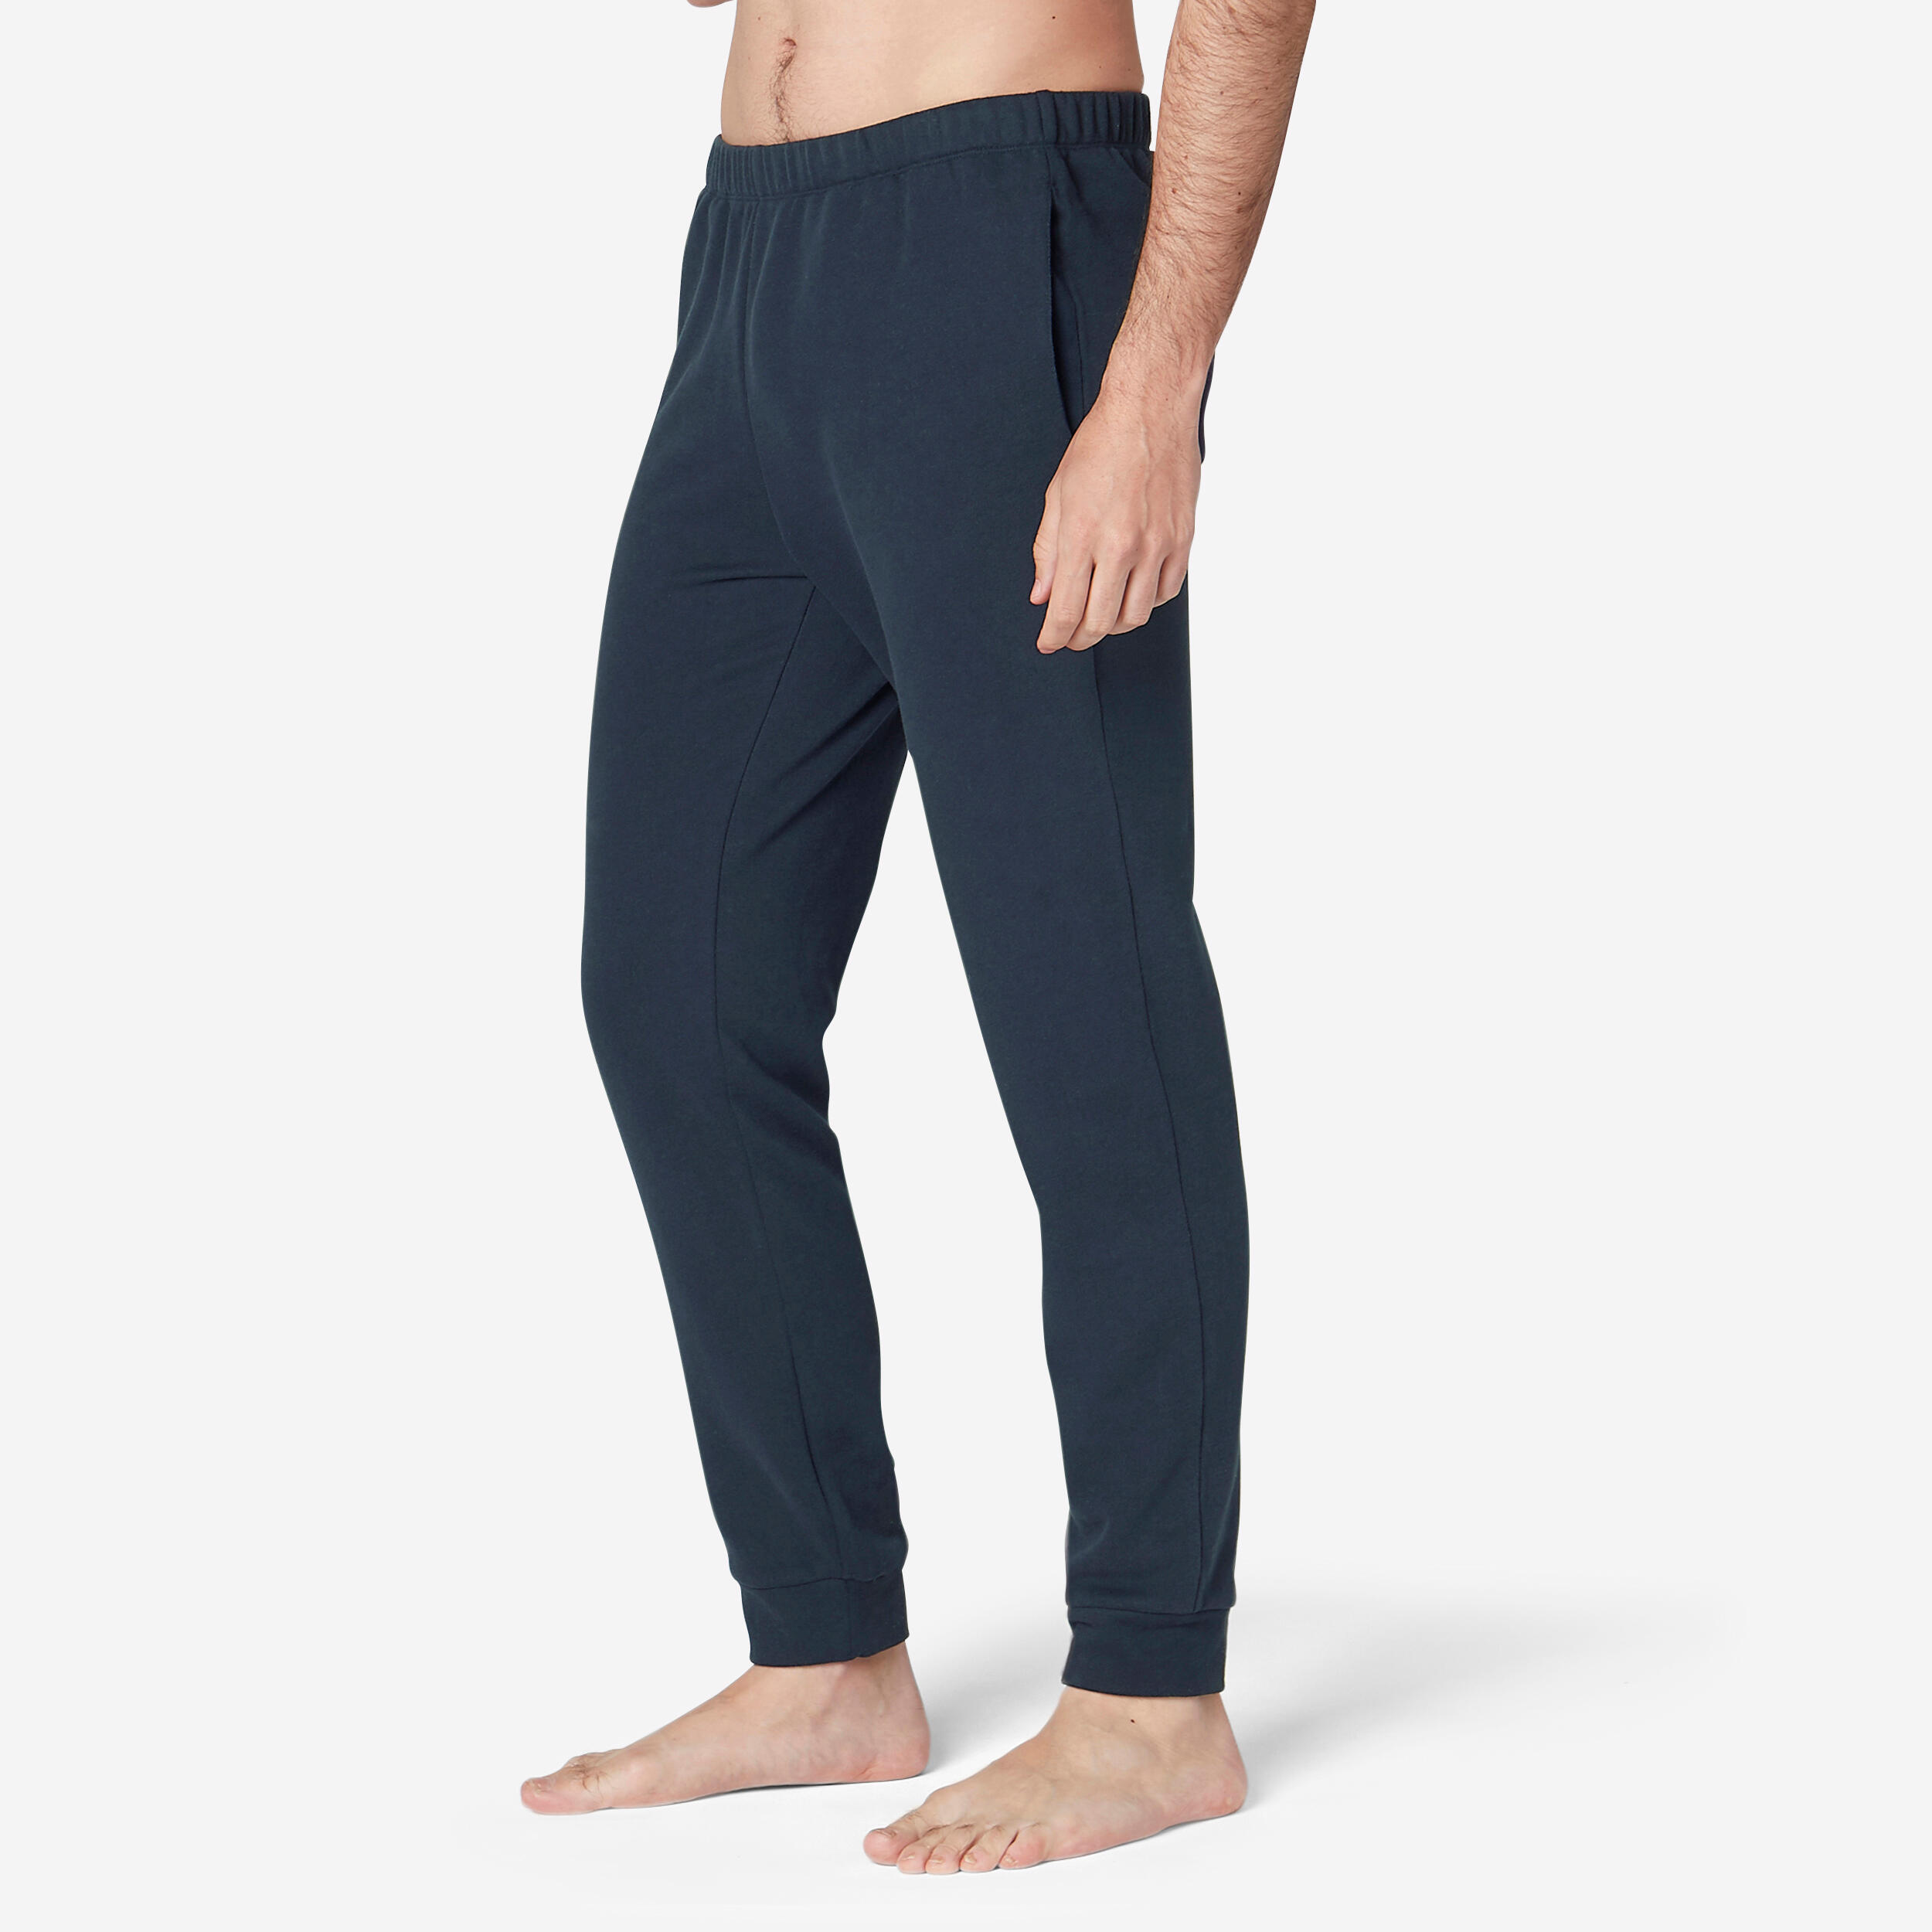 domyos tracksuit bottoms